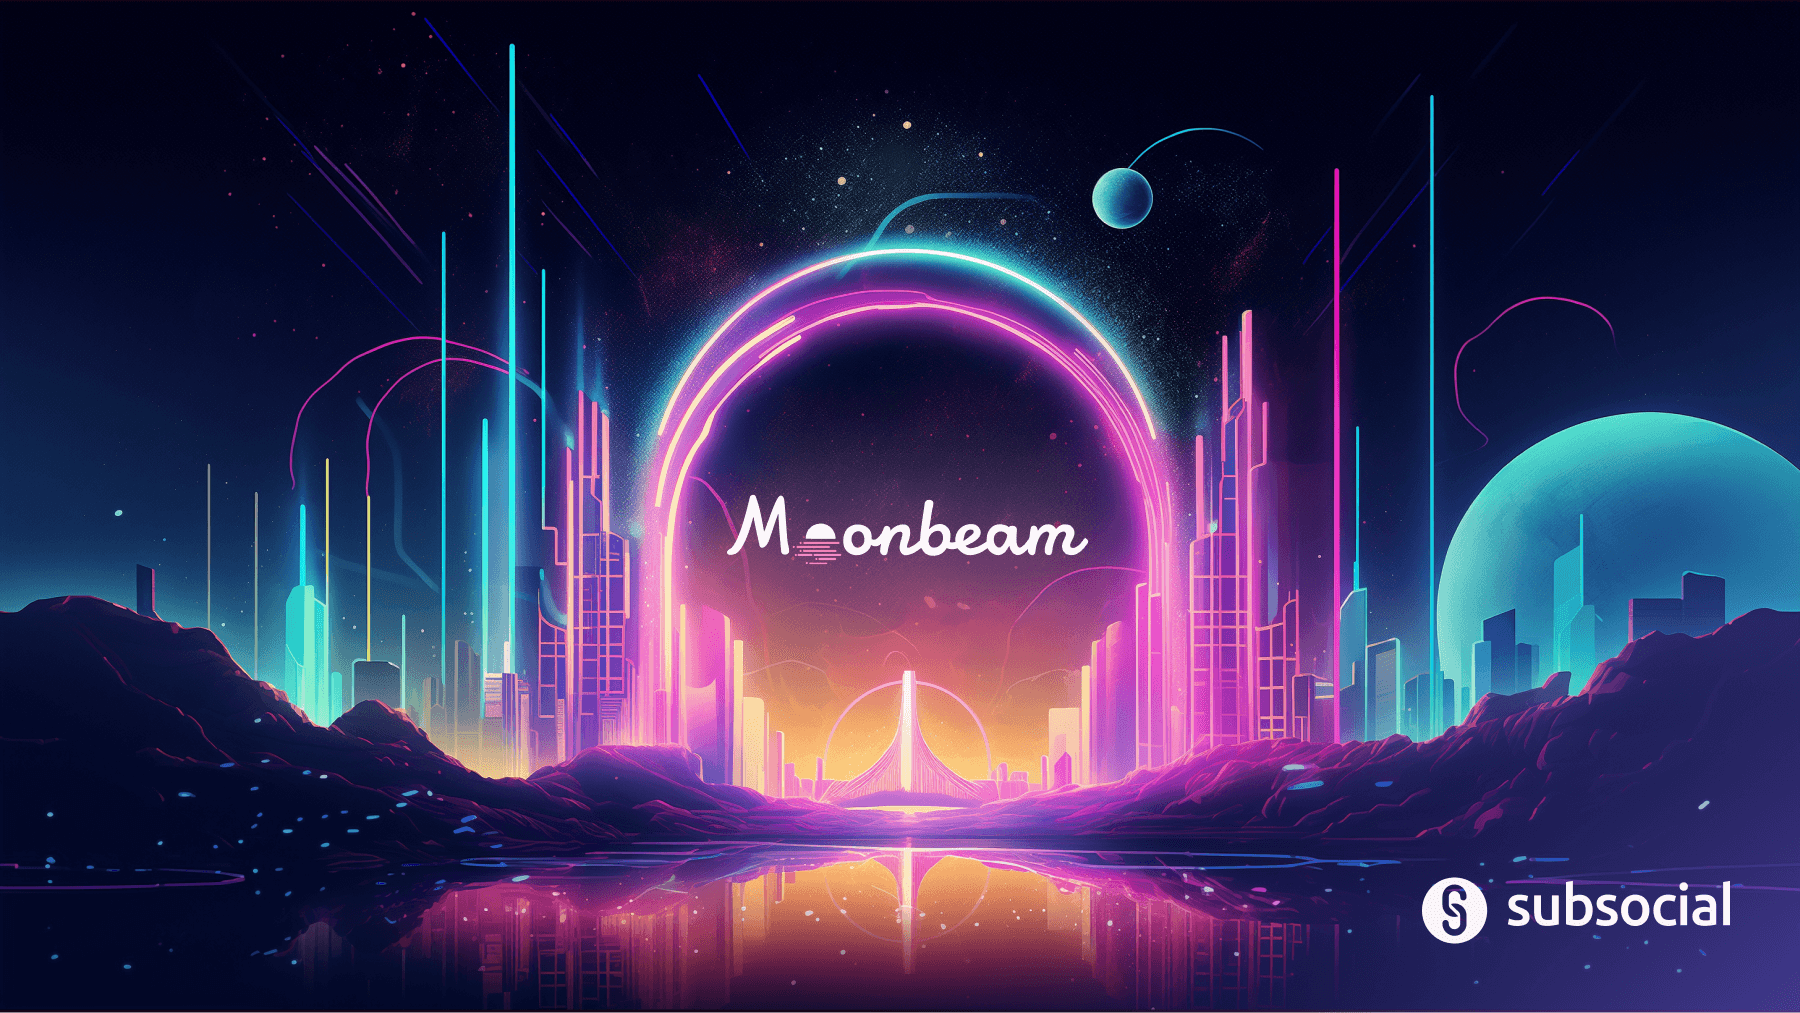 Moonbeam Integrates With Subsocial, Expanding The Reach Of SUB!